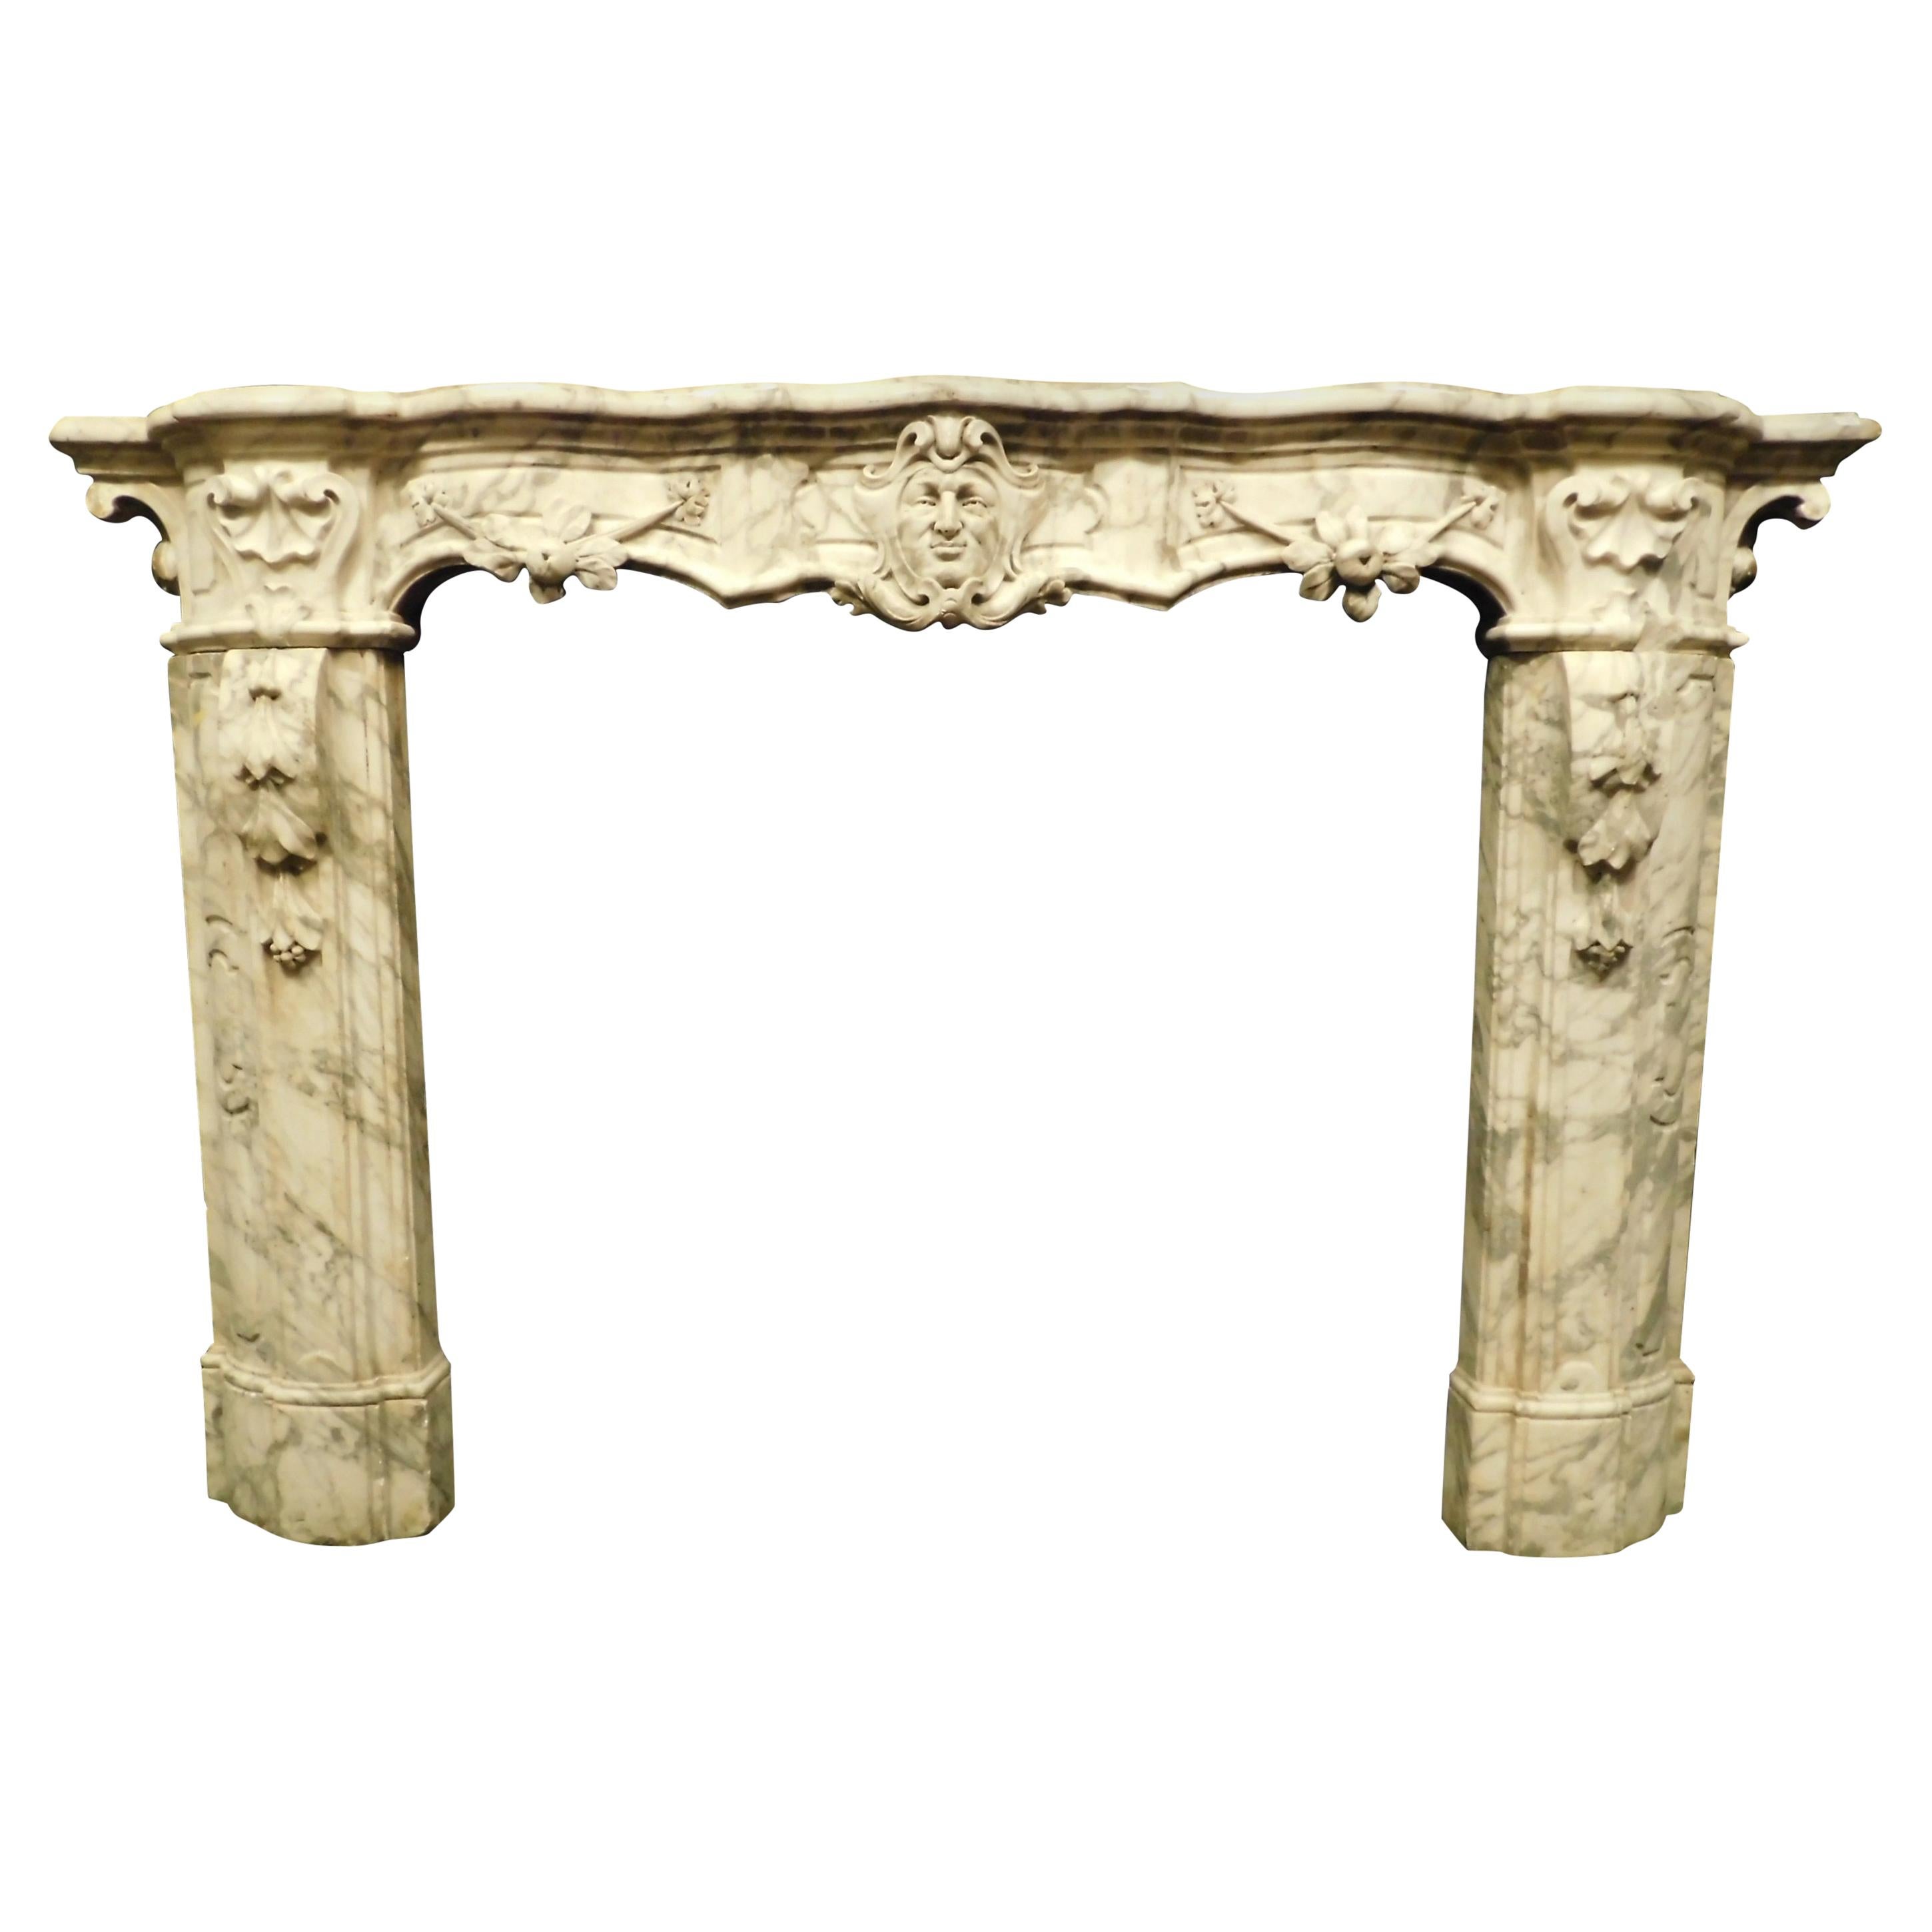 Antique White Marble Fireplace with Mask and Friezes, 18th Century, Italy For Sale